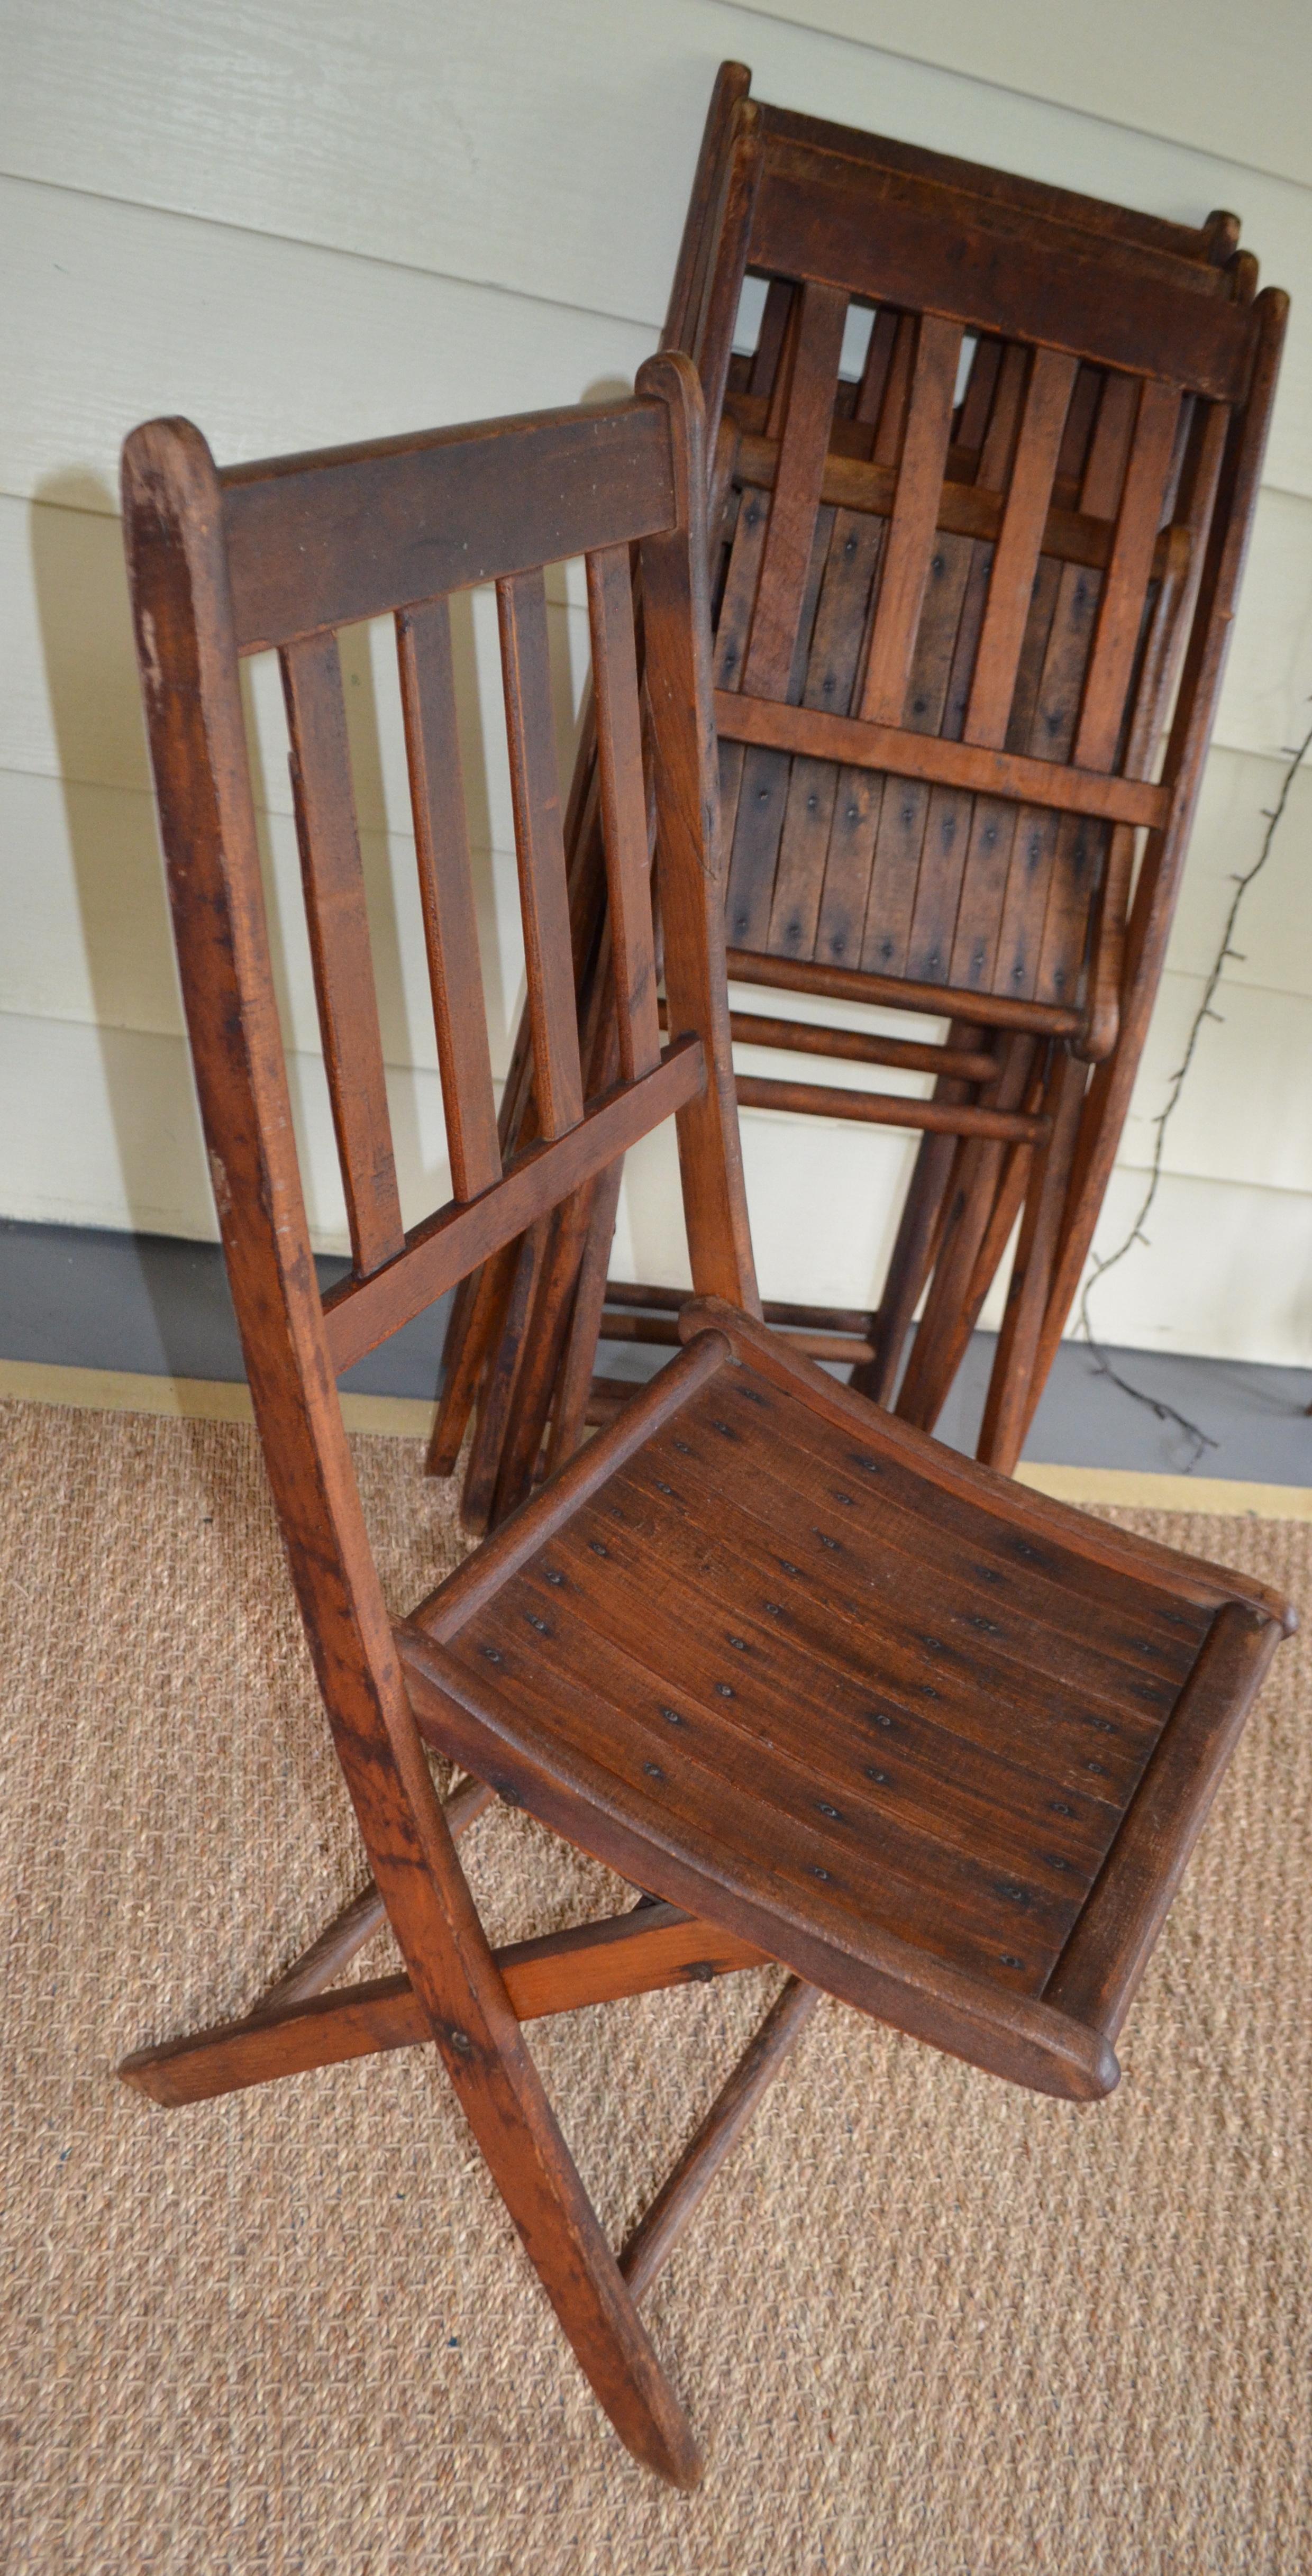 Chairs of Oak, Folding, Late 19th Century European, Set of 4, Multiple Sets For Sale 11